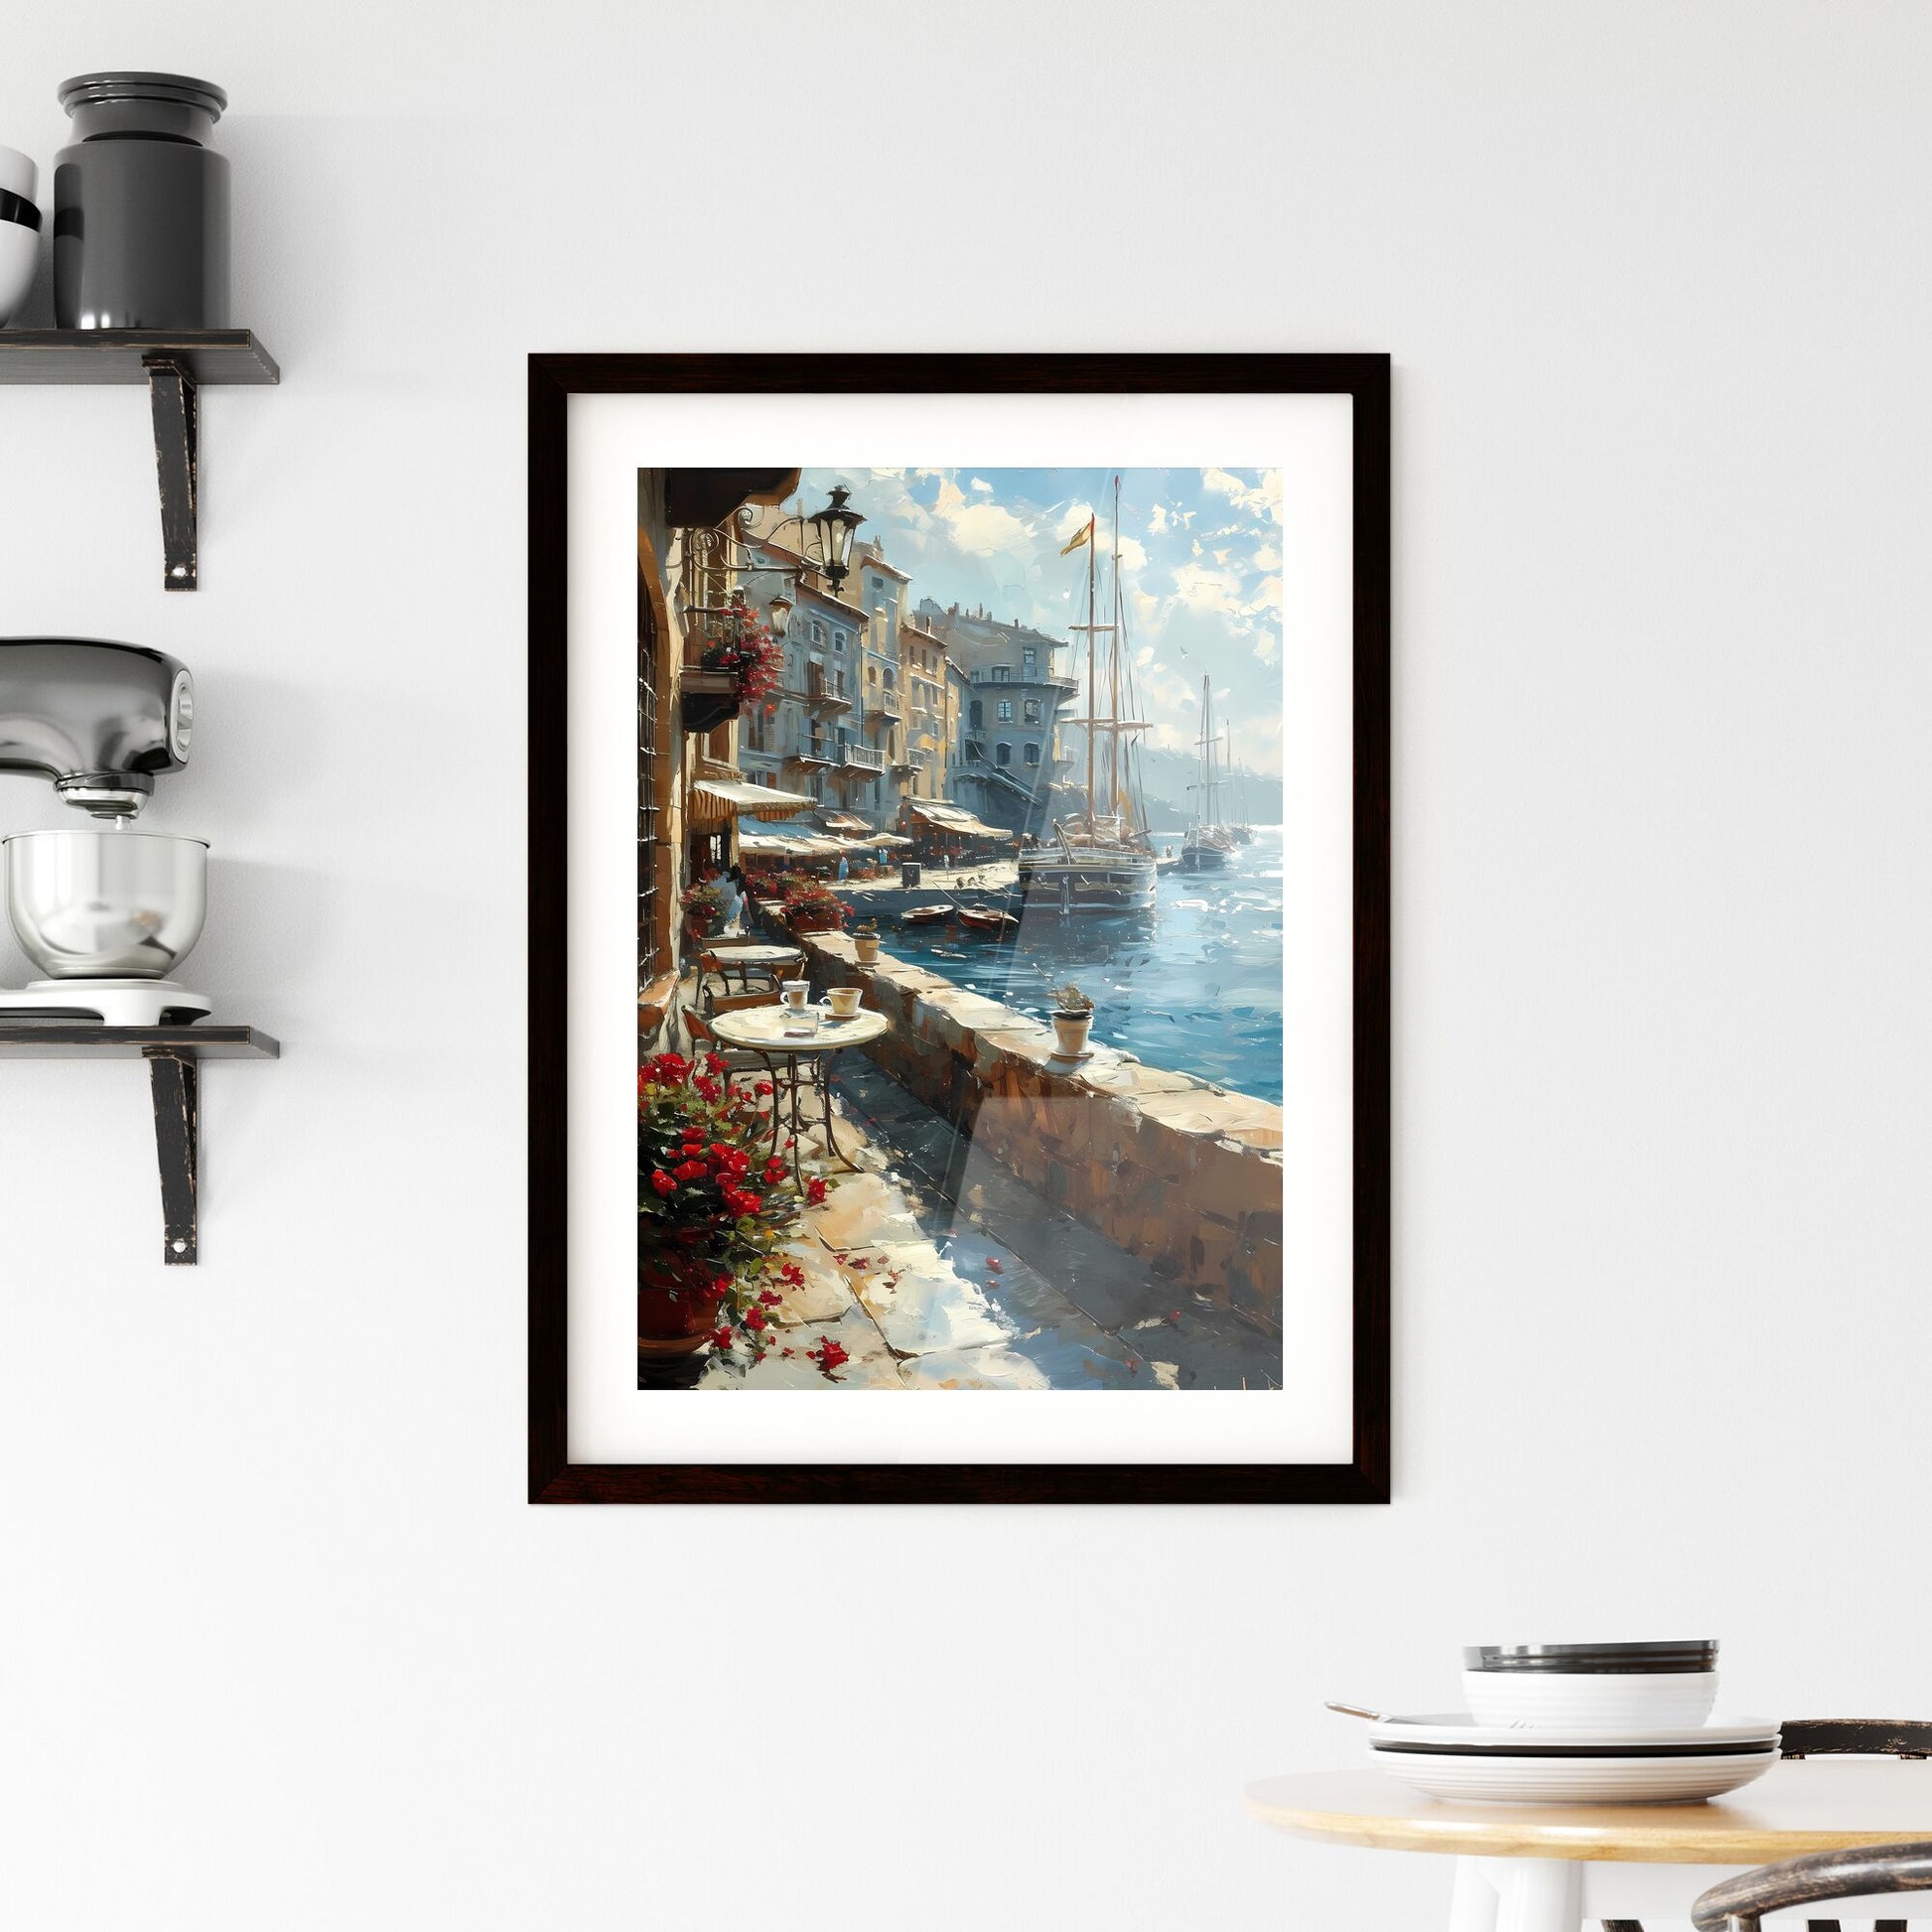 A Poster of A beautiful woman is drinking coffee - A Waterfront With Boats And Tables Default Title